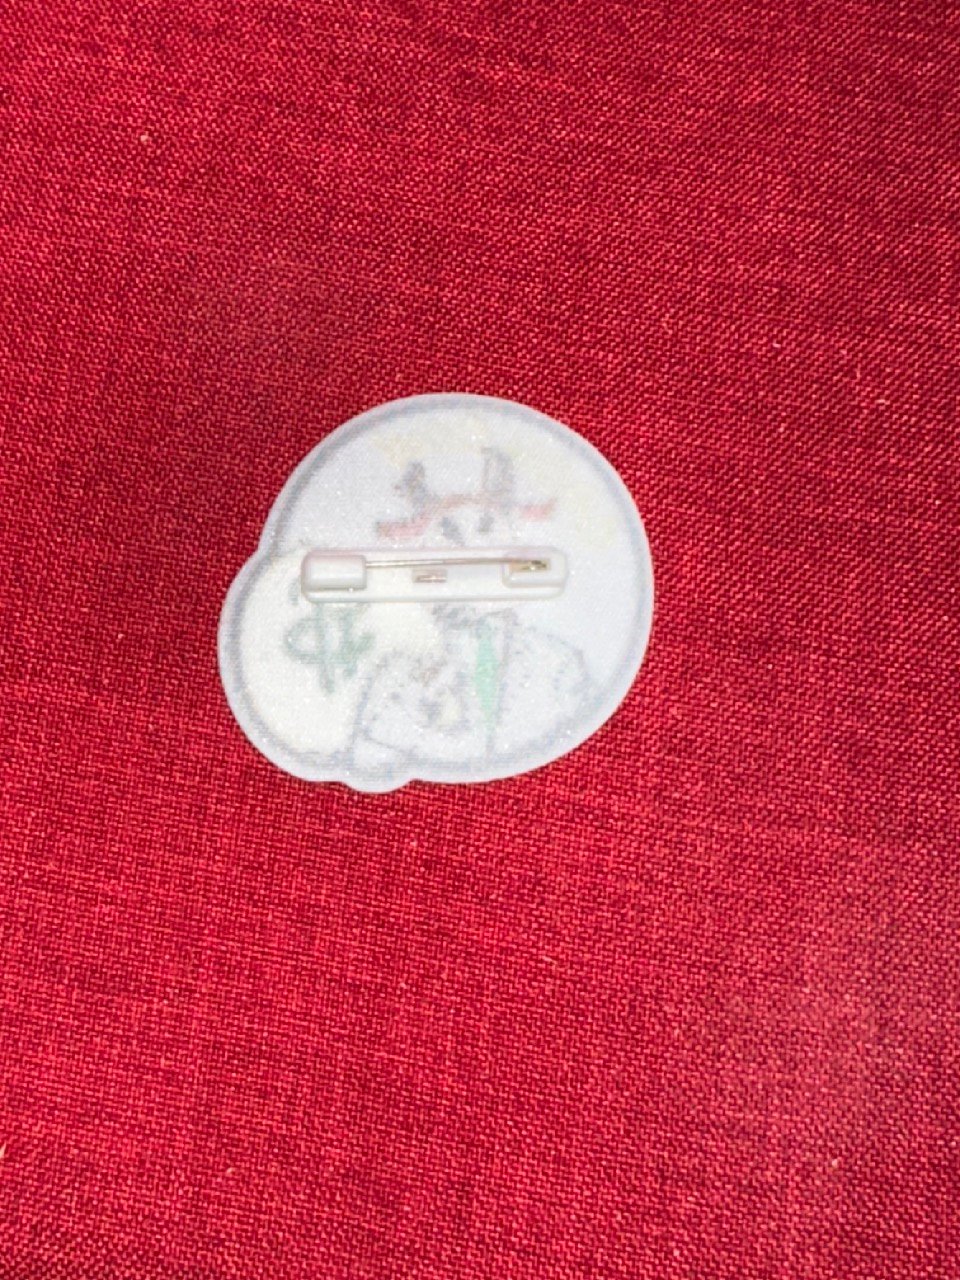 Image of Cash Cow embroidery badge